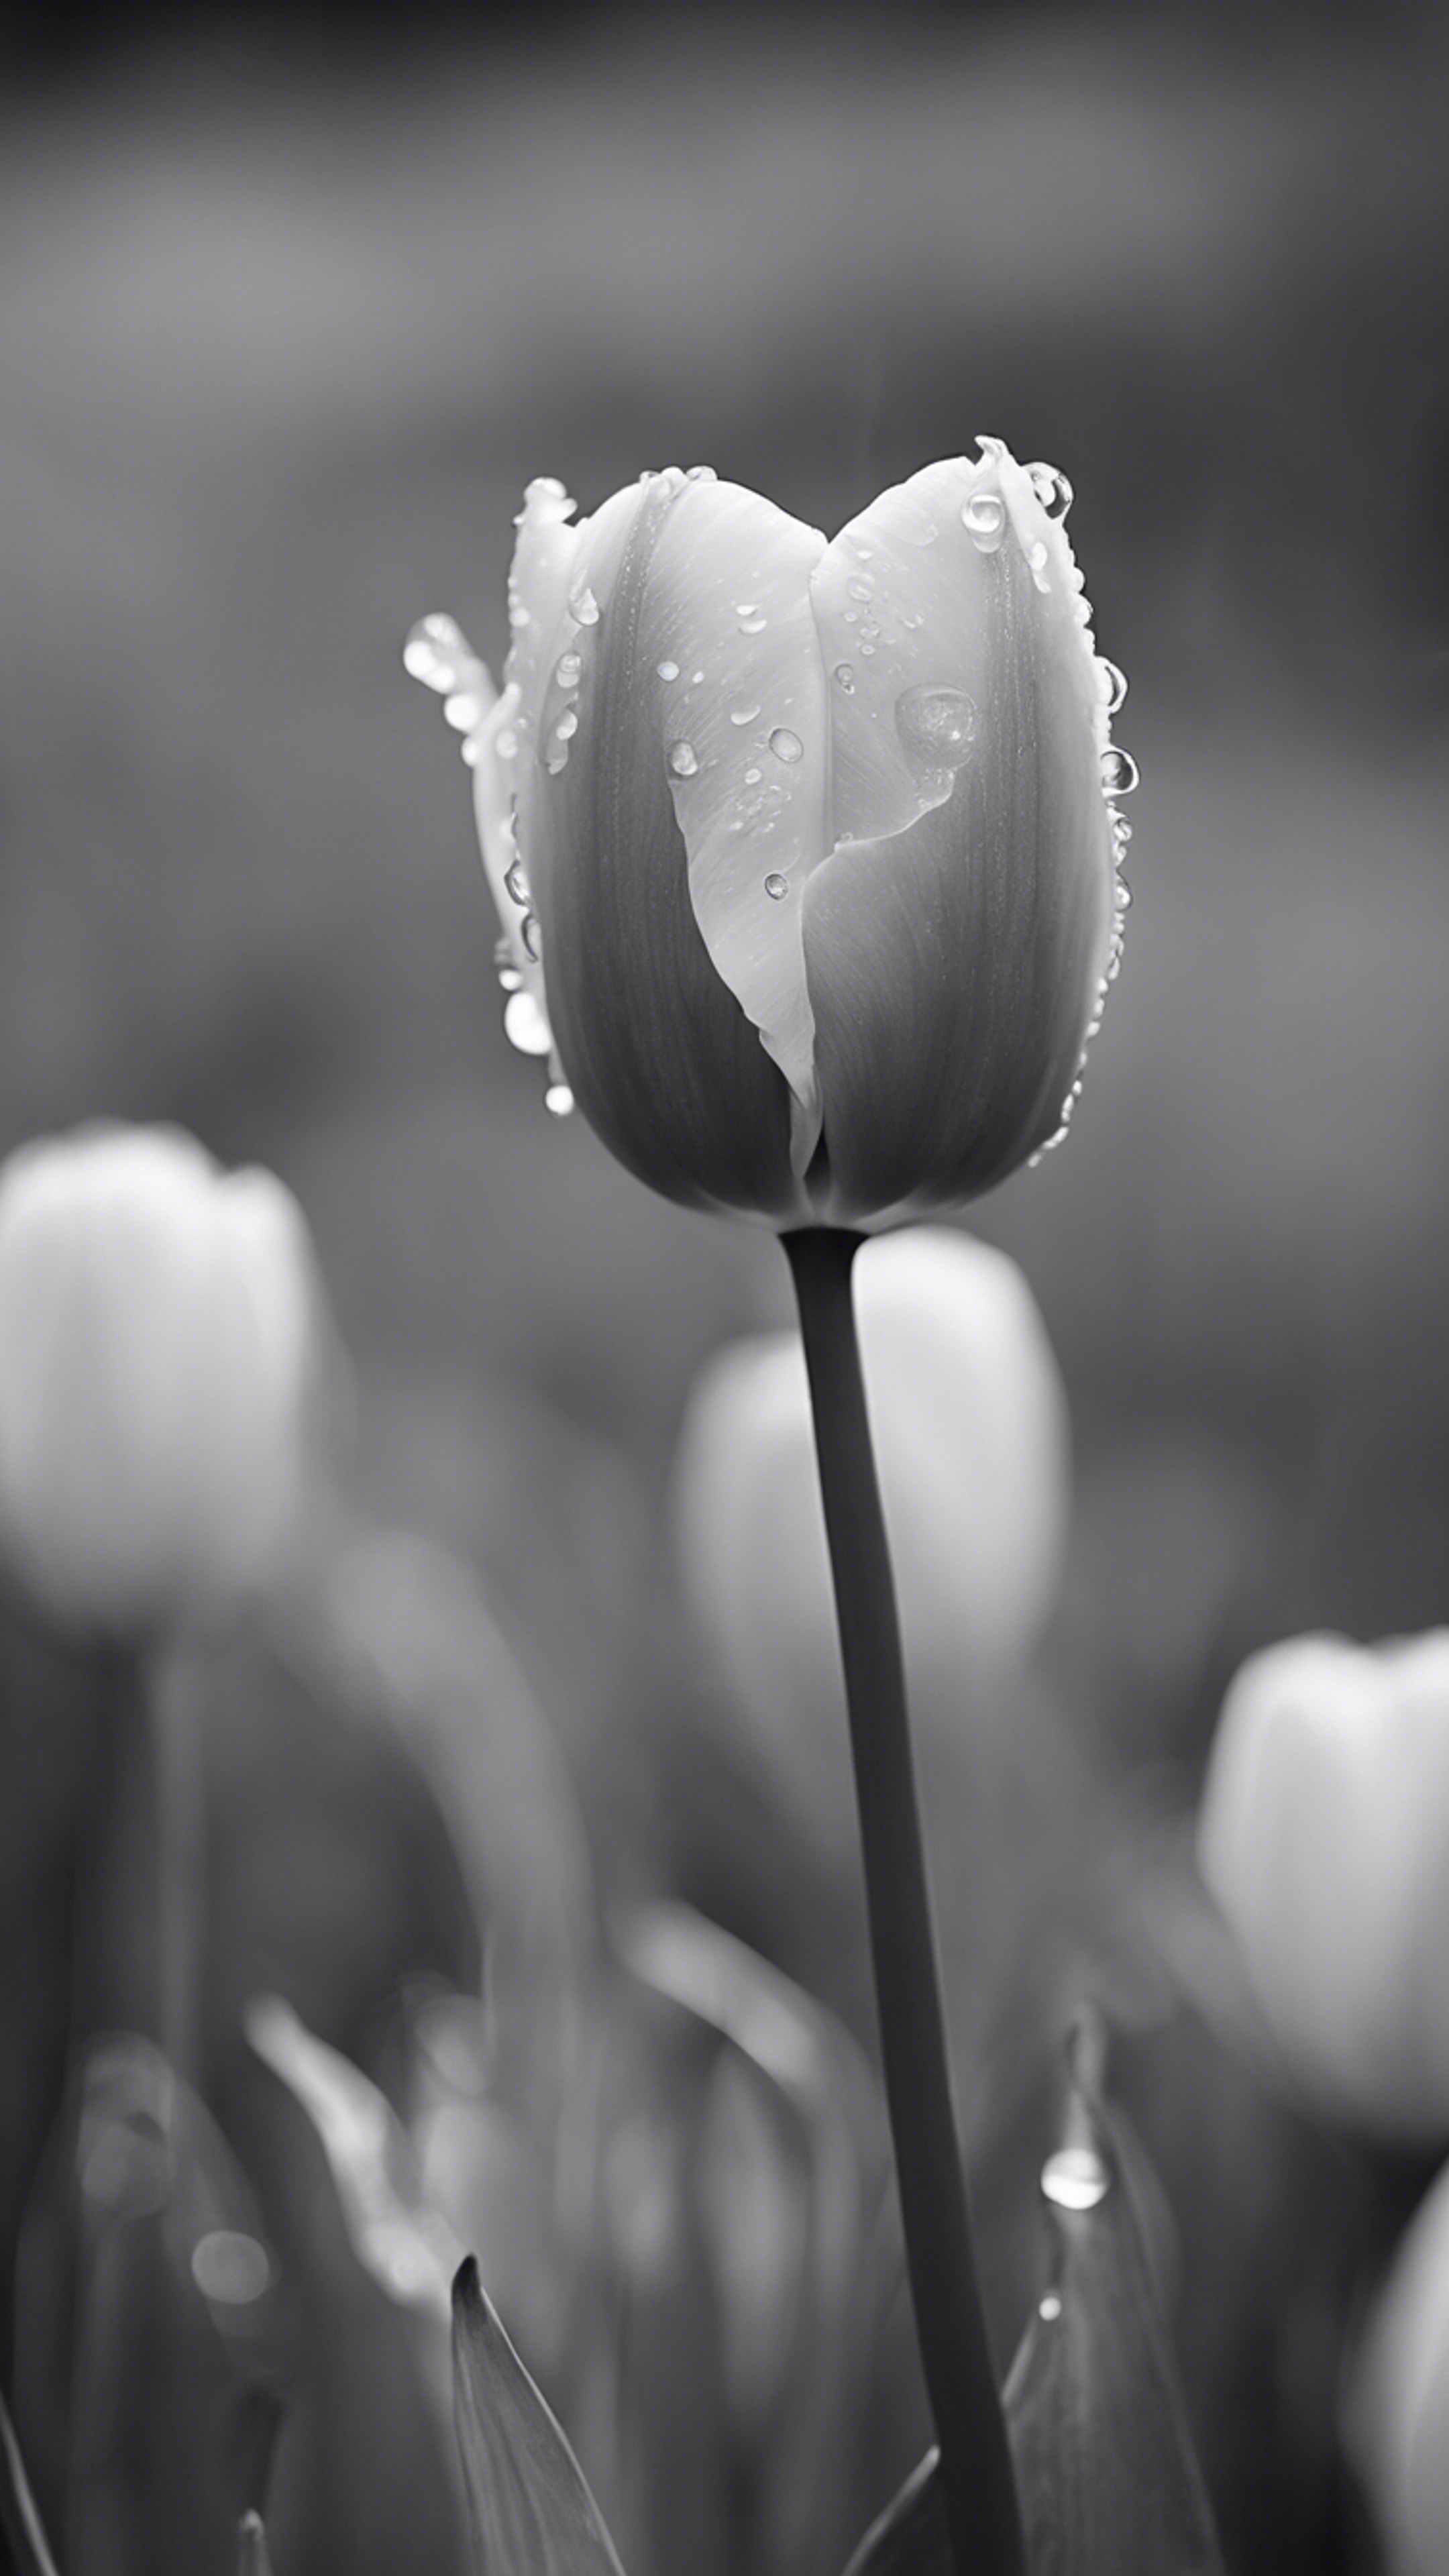 A black-and-white photograph of a tulip in full bloom in the rain. Тапет[646ce87a121a4320b6e6]